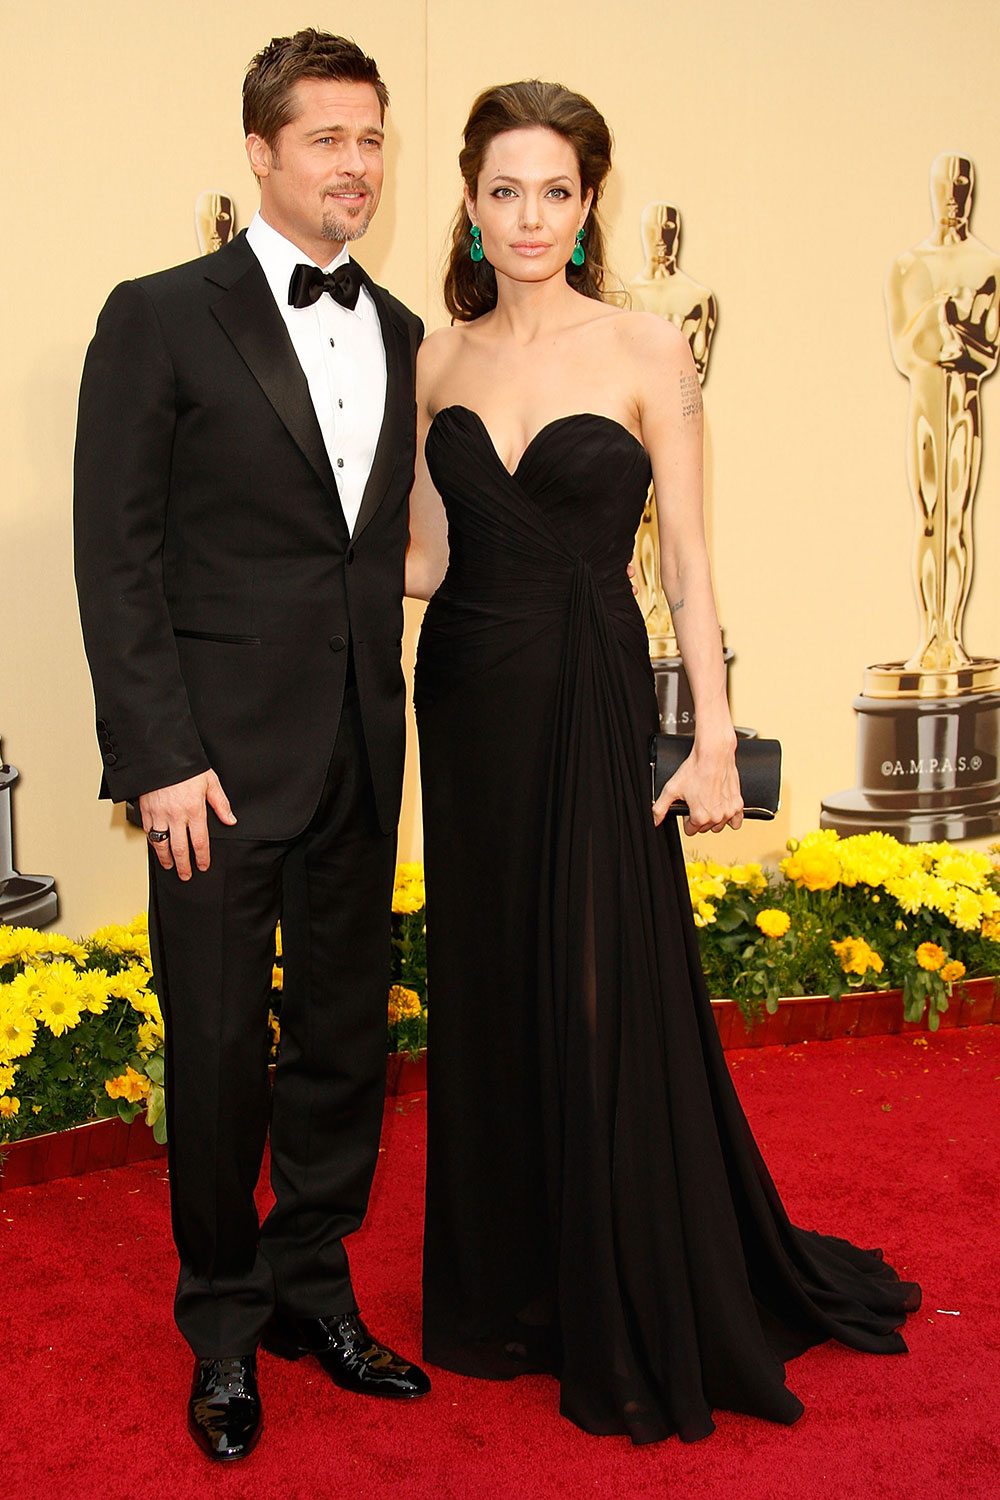 Brad Pitt and Angelina Jolie at the 81st Annual Academy Awards in 2009